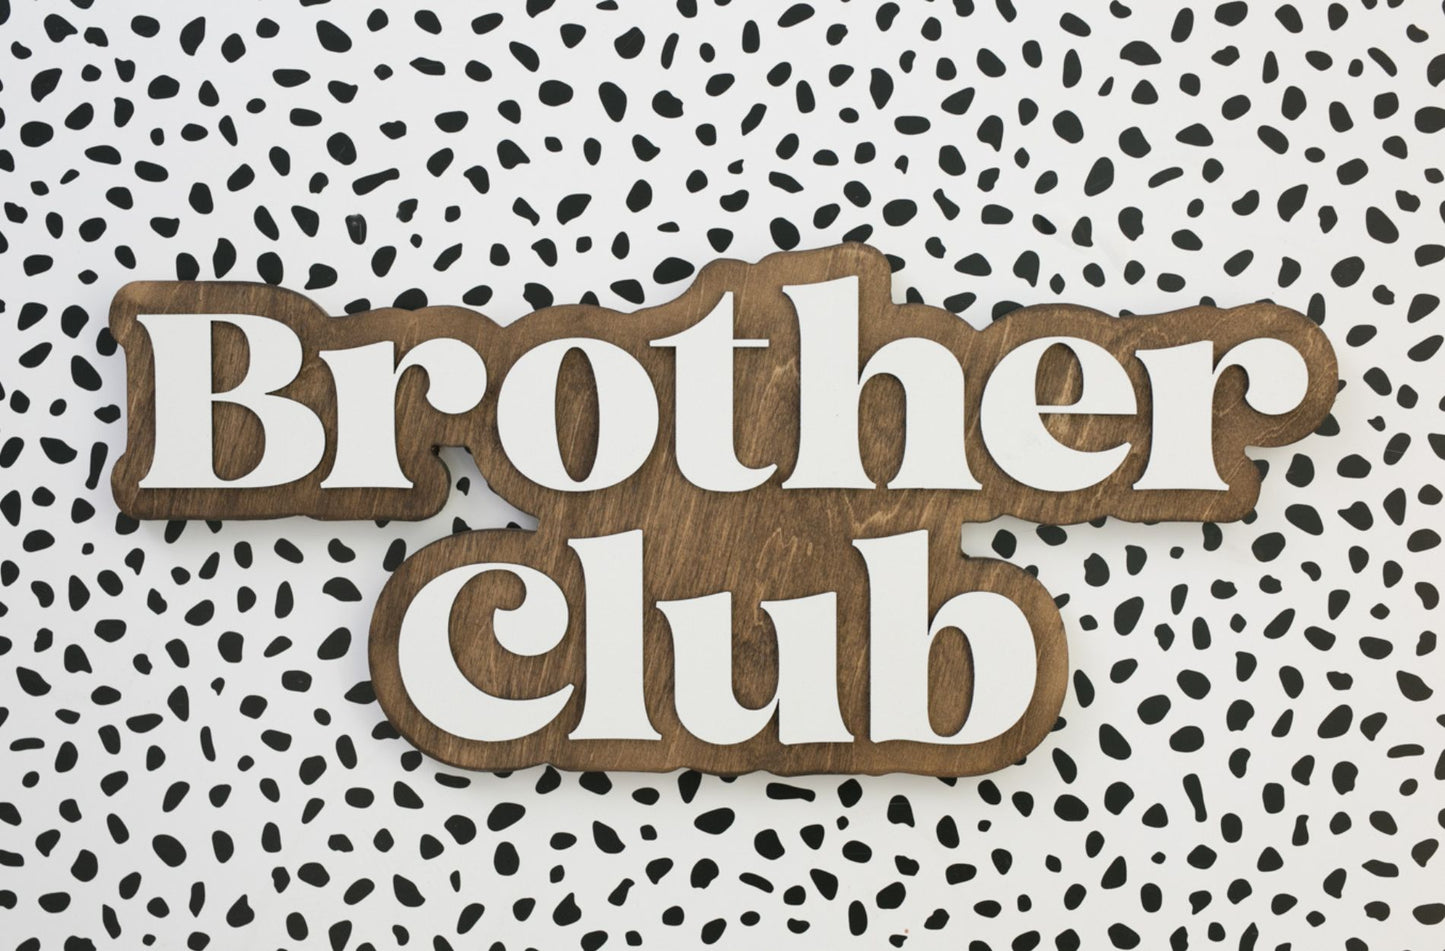 Brother Club Bubble Wood Sign